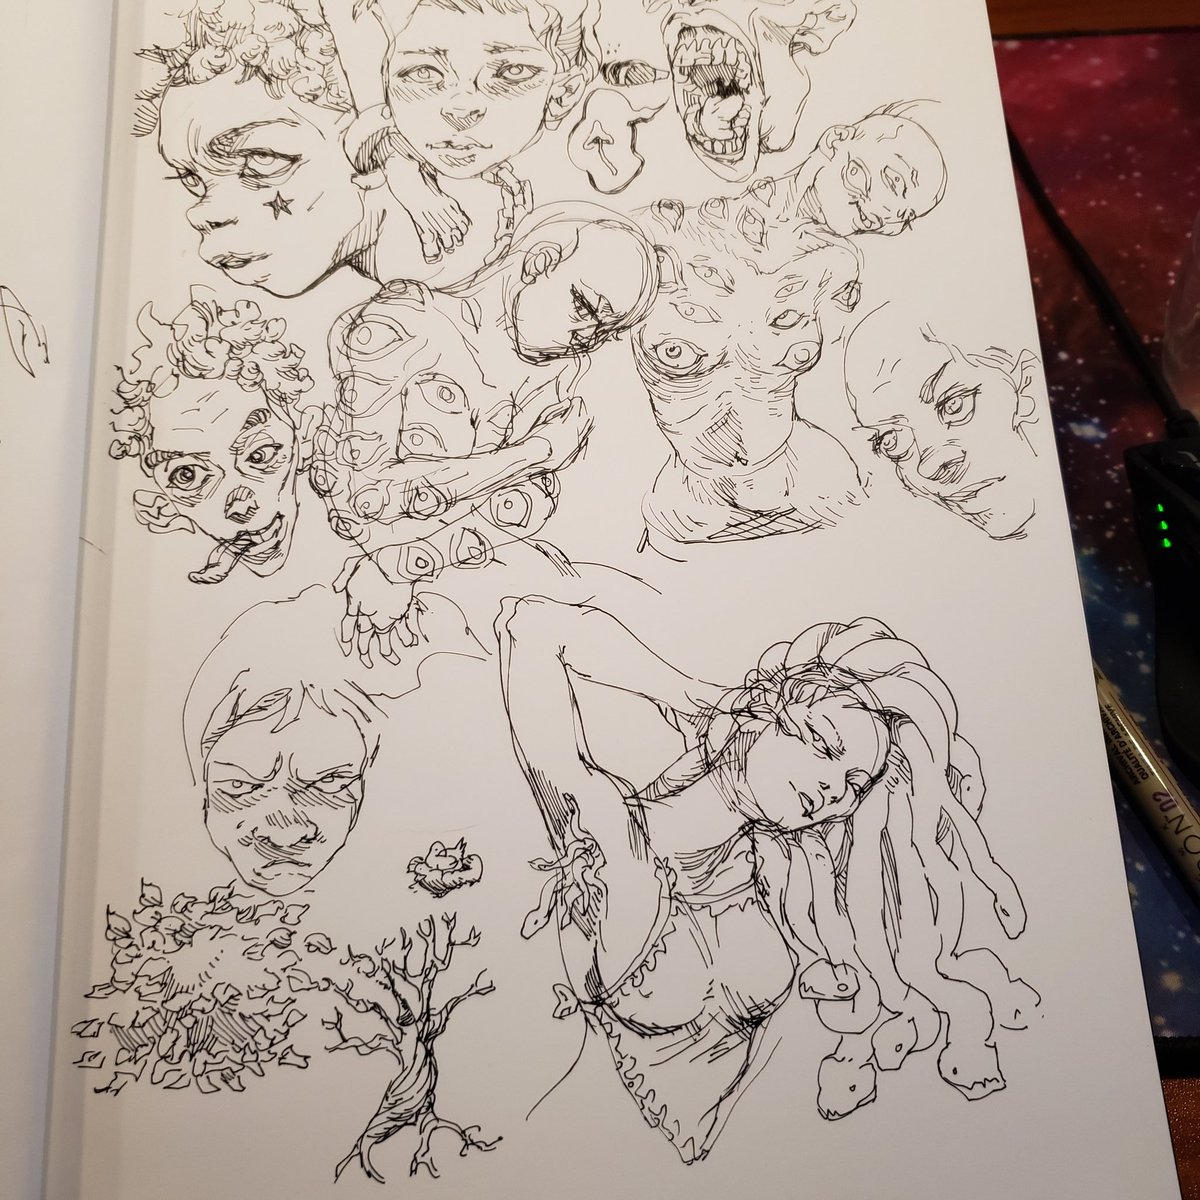 Some ink sketches from earlier 